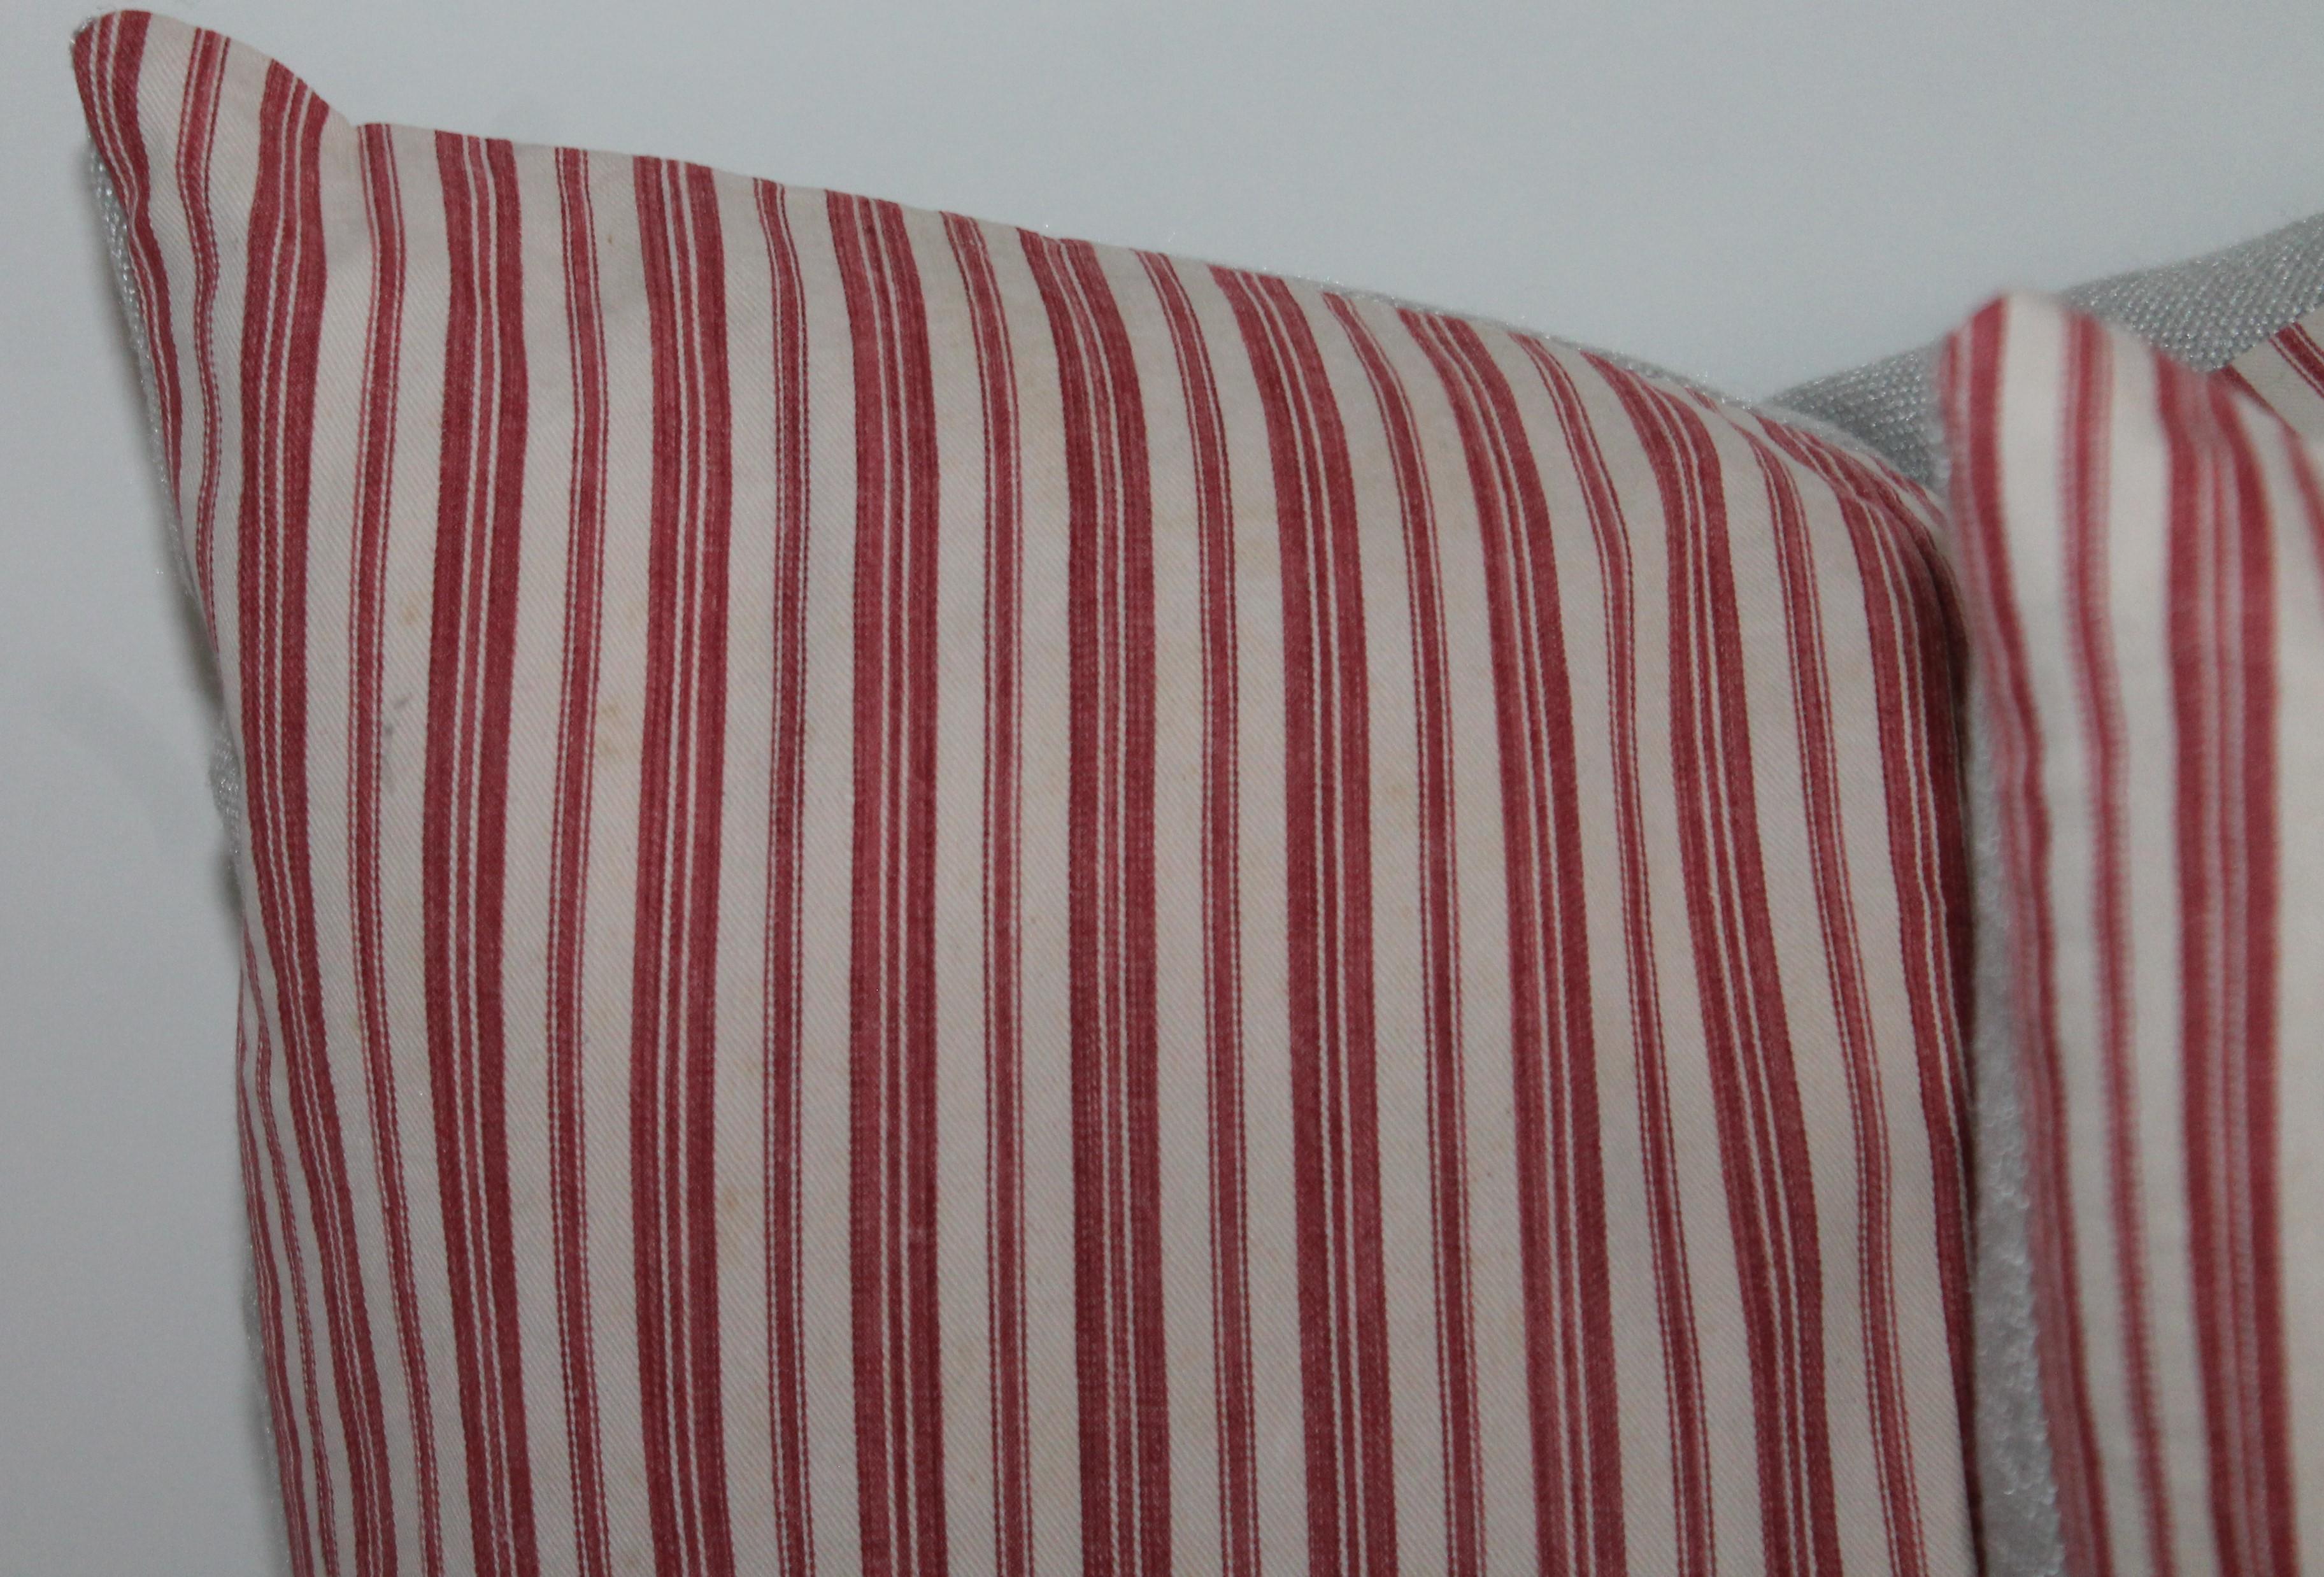 This collection of four 19th century red and white ticking pillows are in fine condition. The inserts are down and feather fill. The backings are in cream cotton linen.